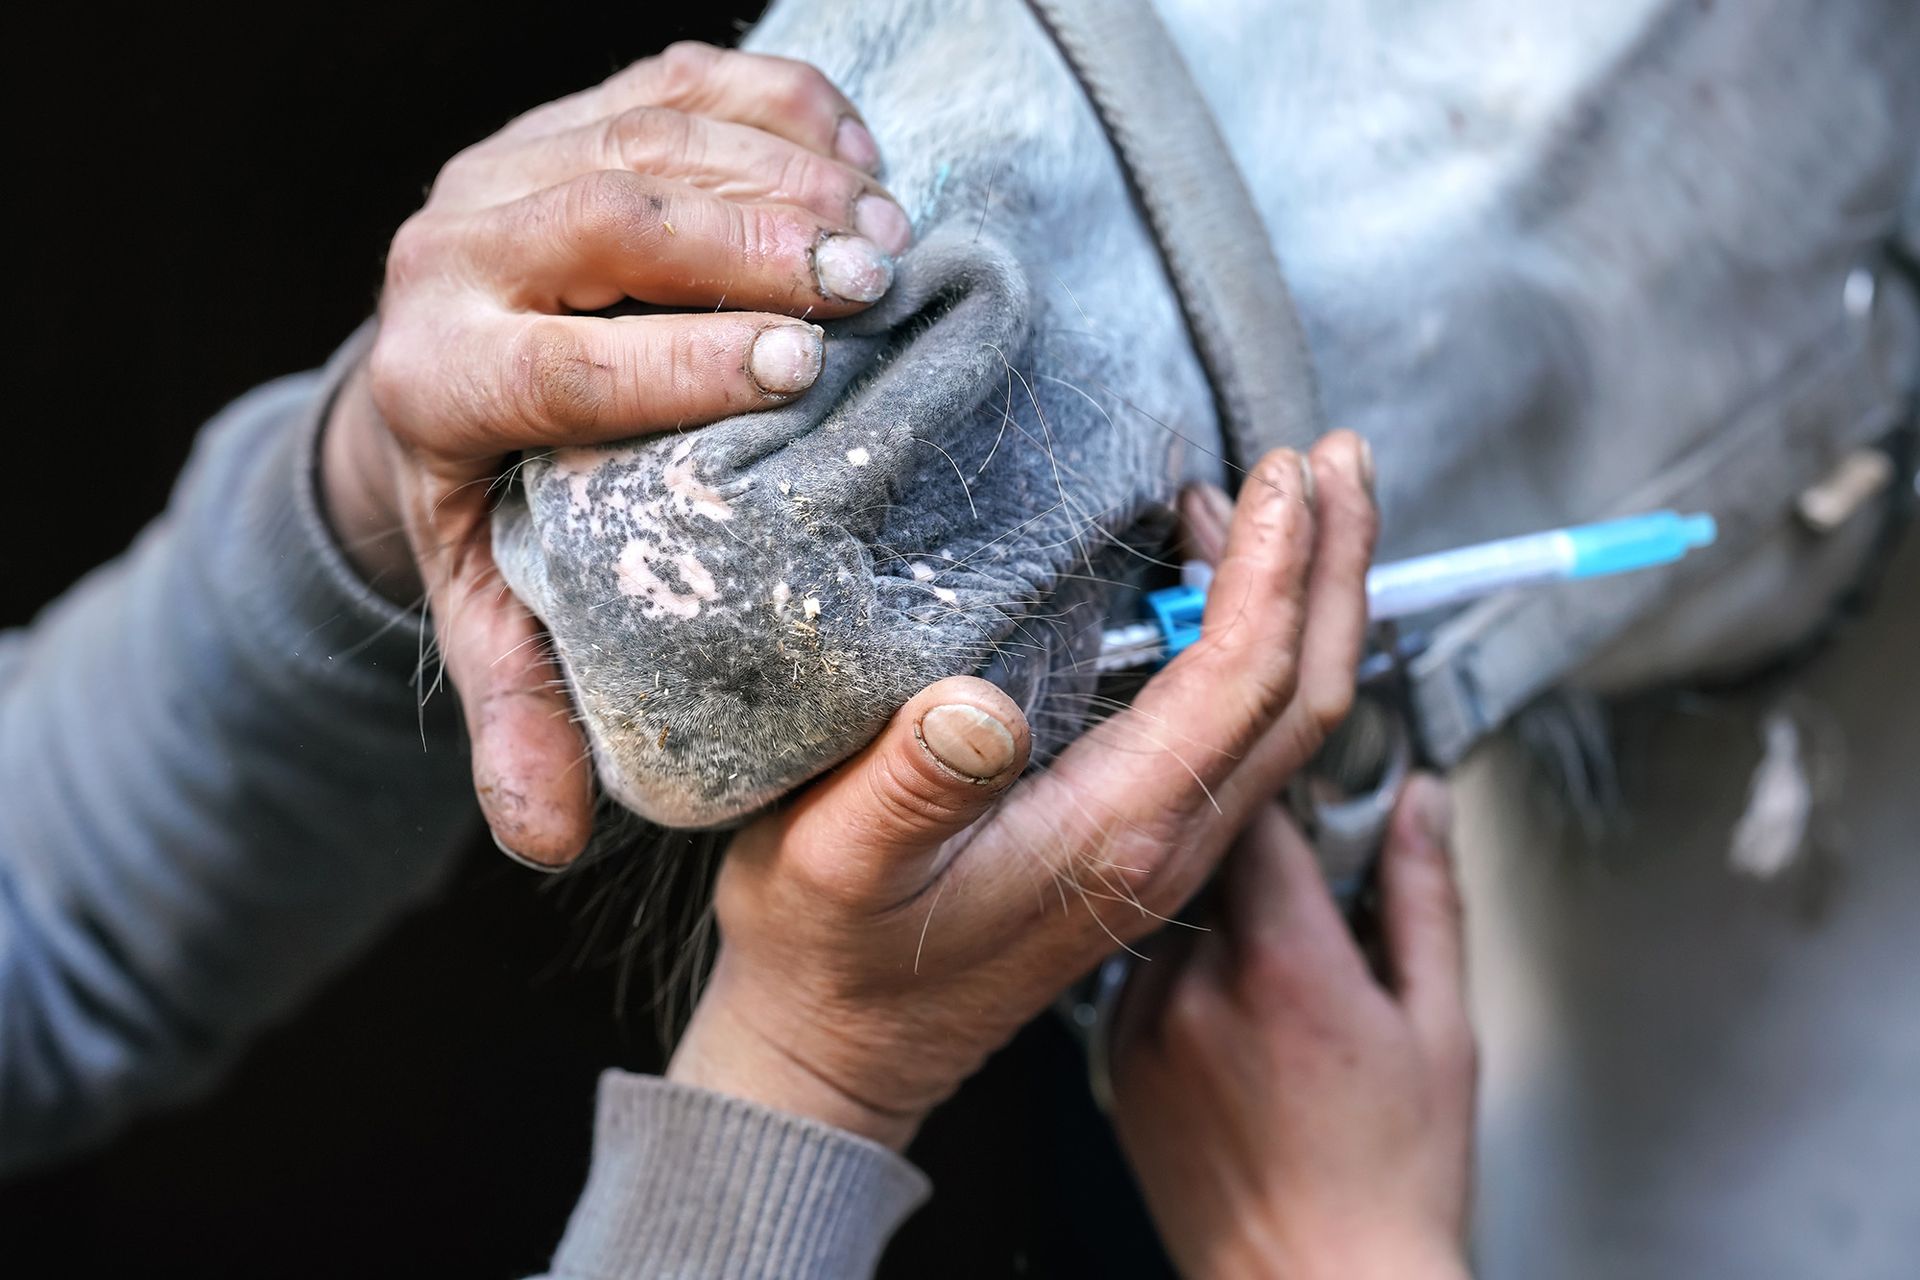 A person is holding a horse 's nose with a syringe in it.